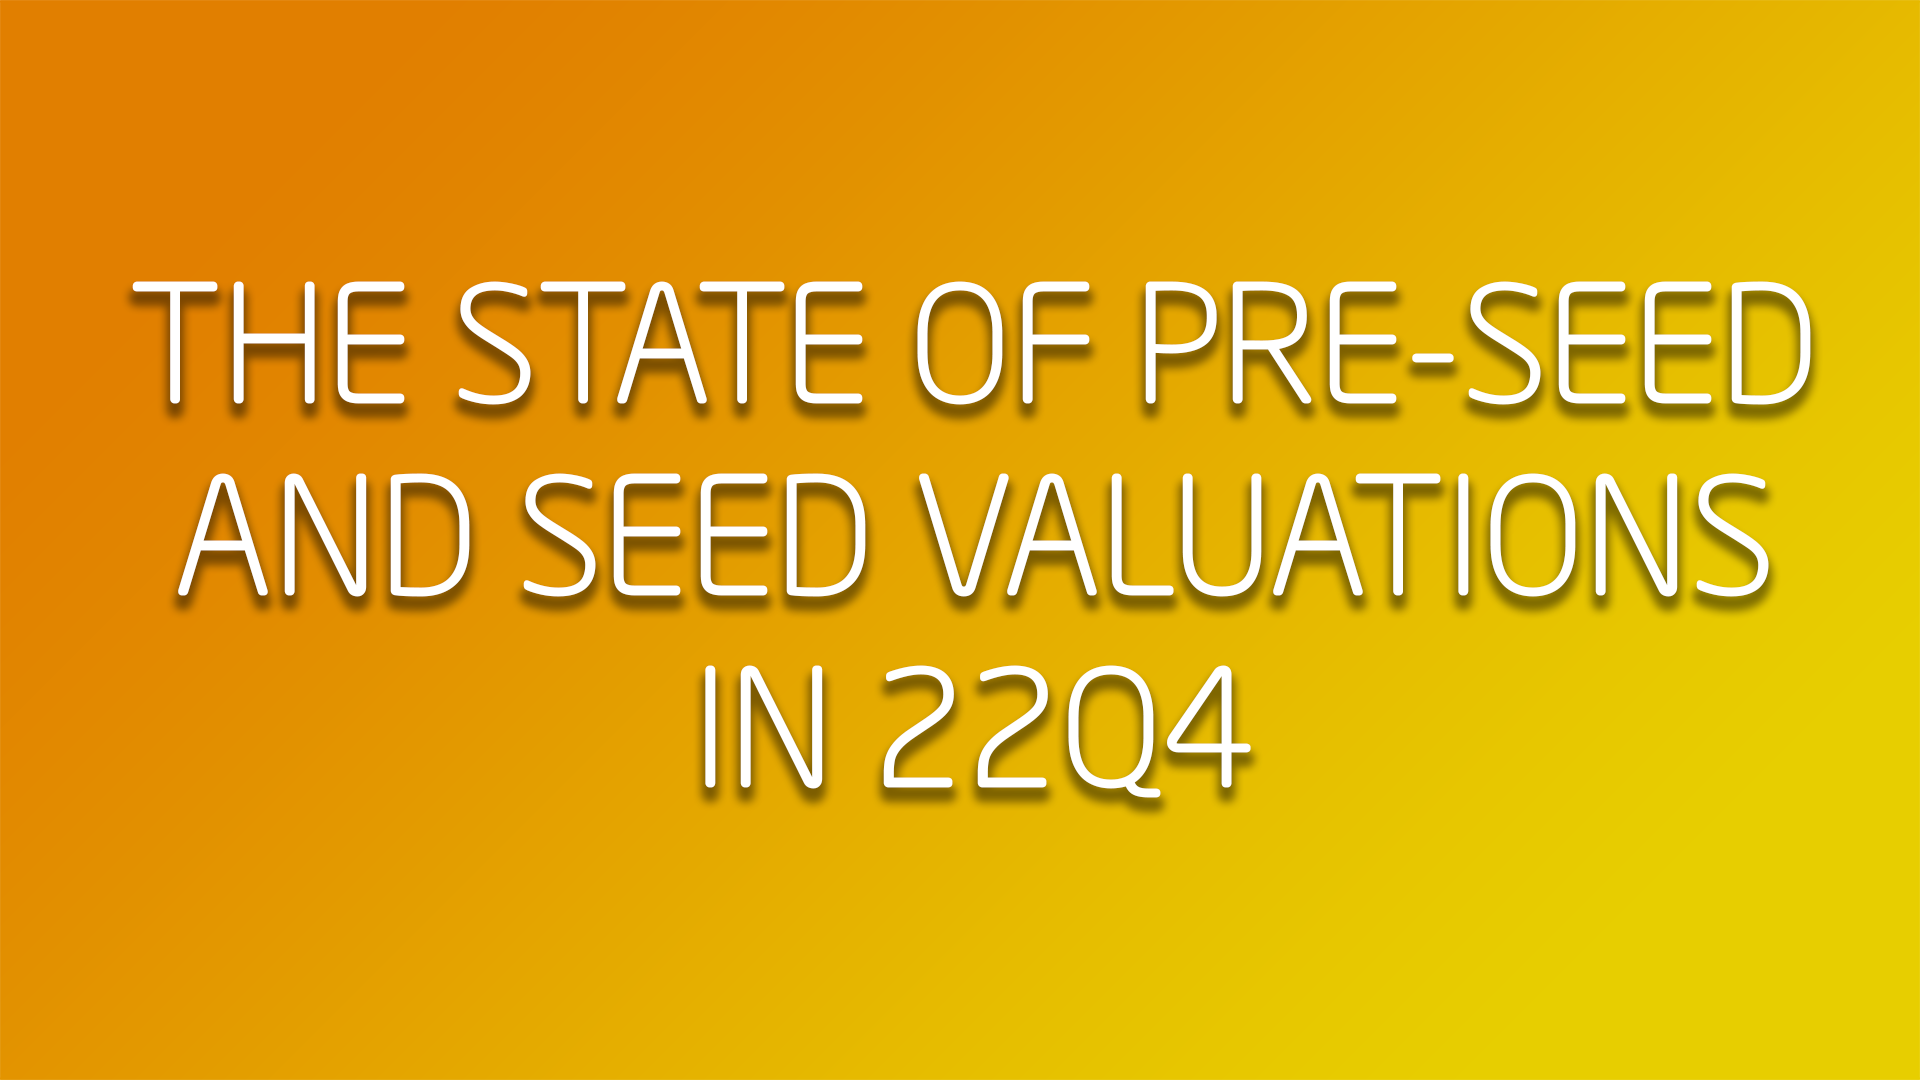 The State of Pre-seed & Seed Valuations in 22Q4